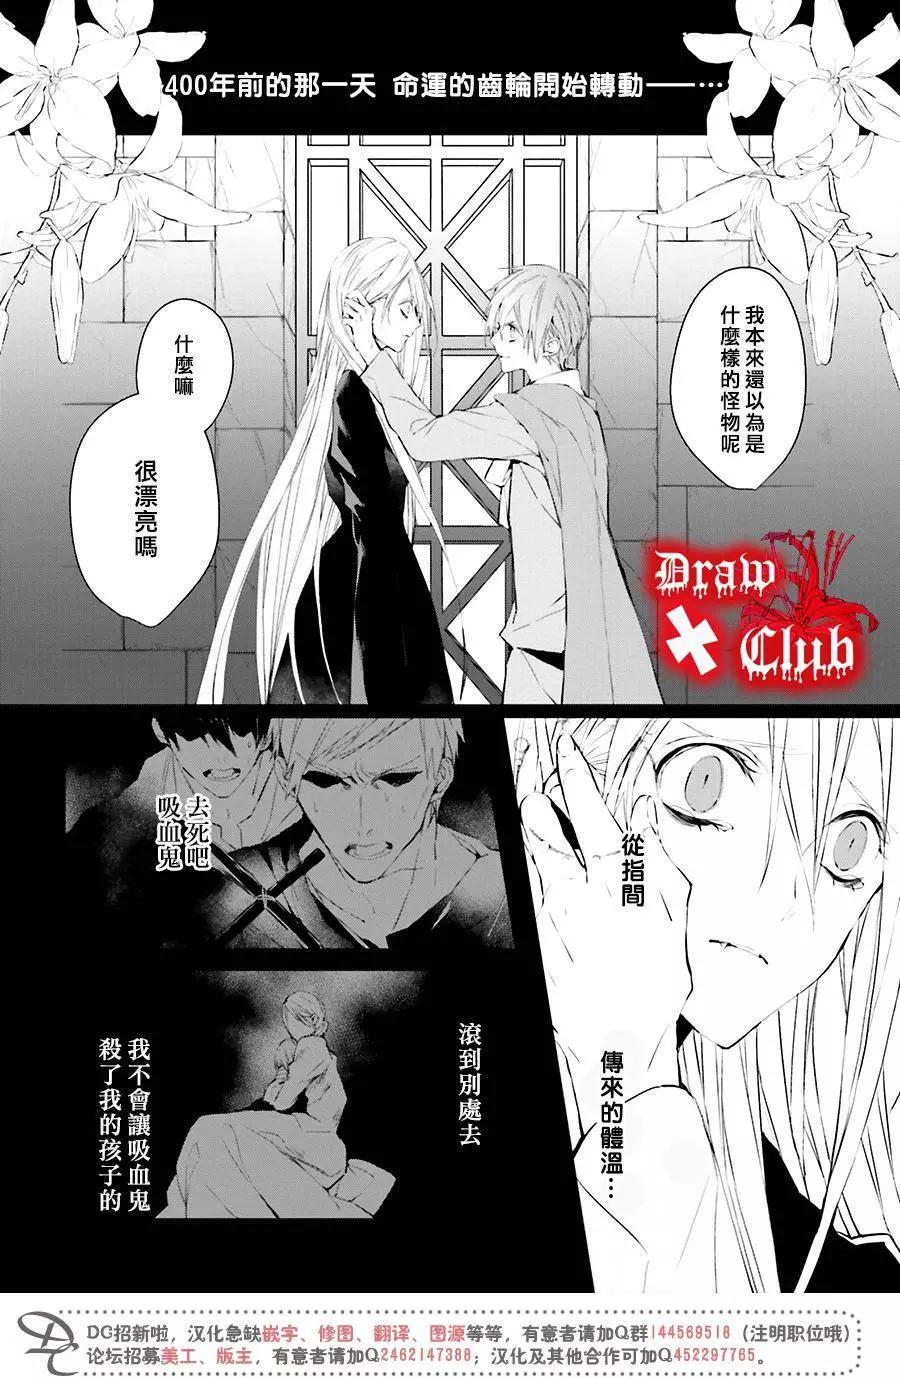 Bloody Mary - 第33回 - 3